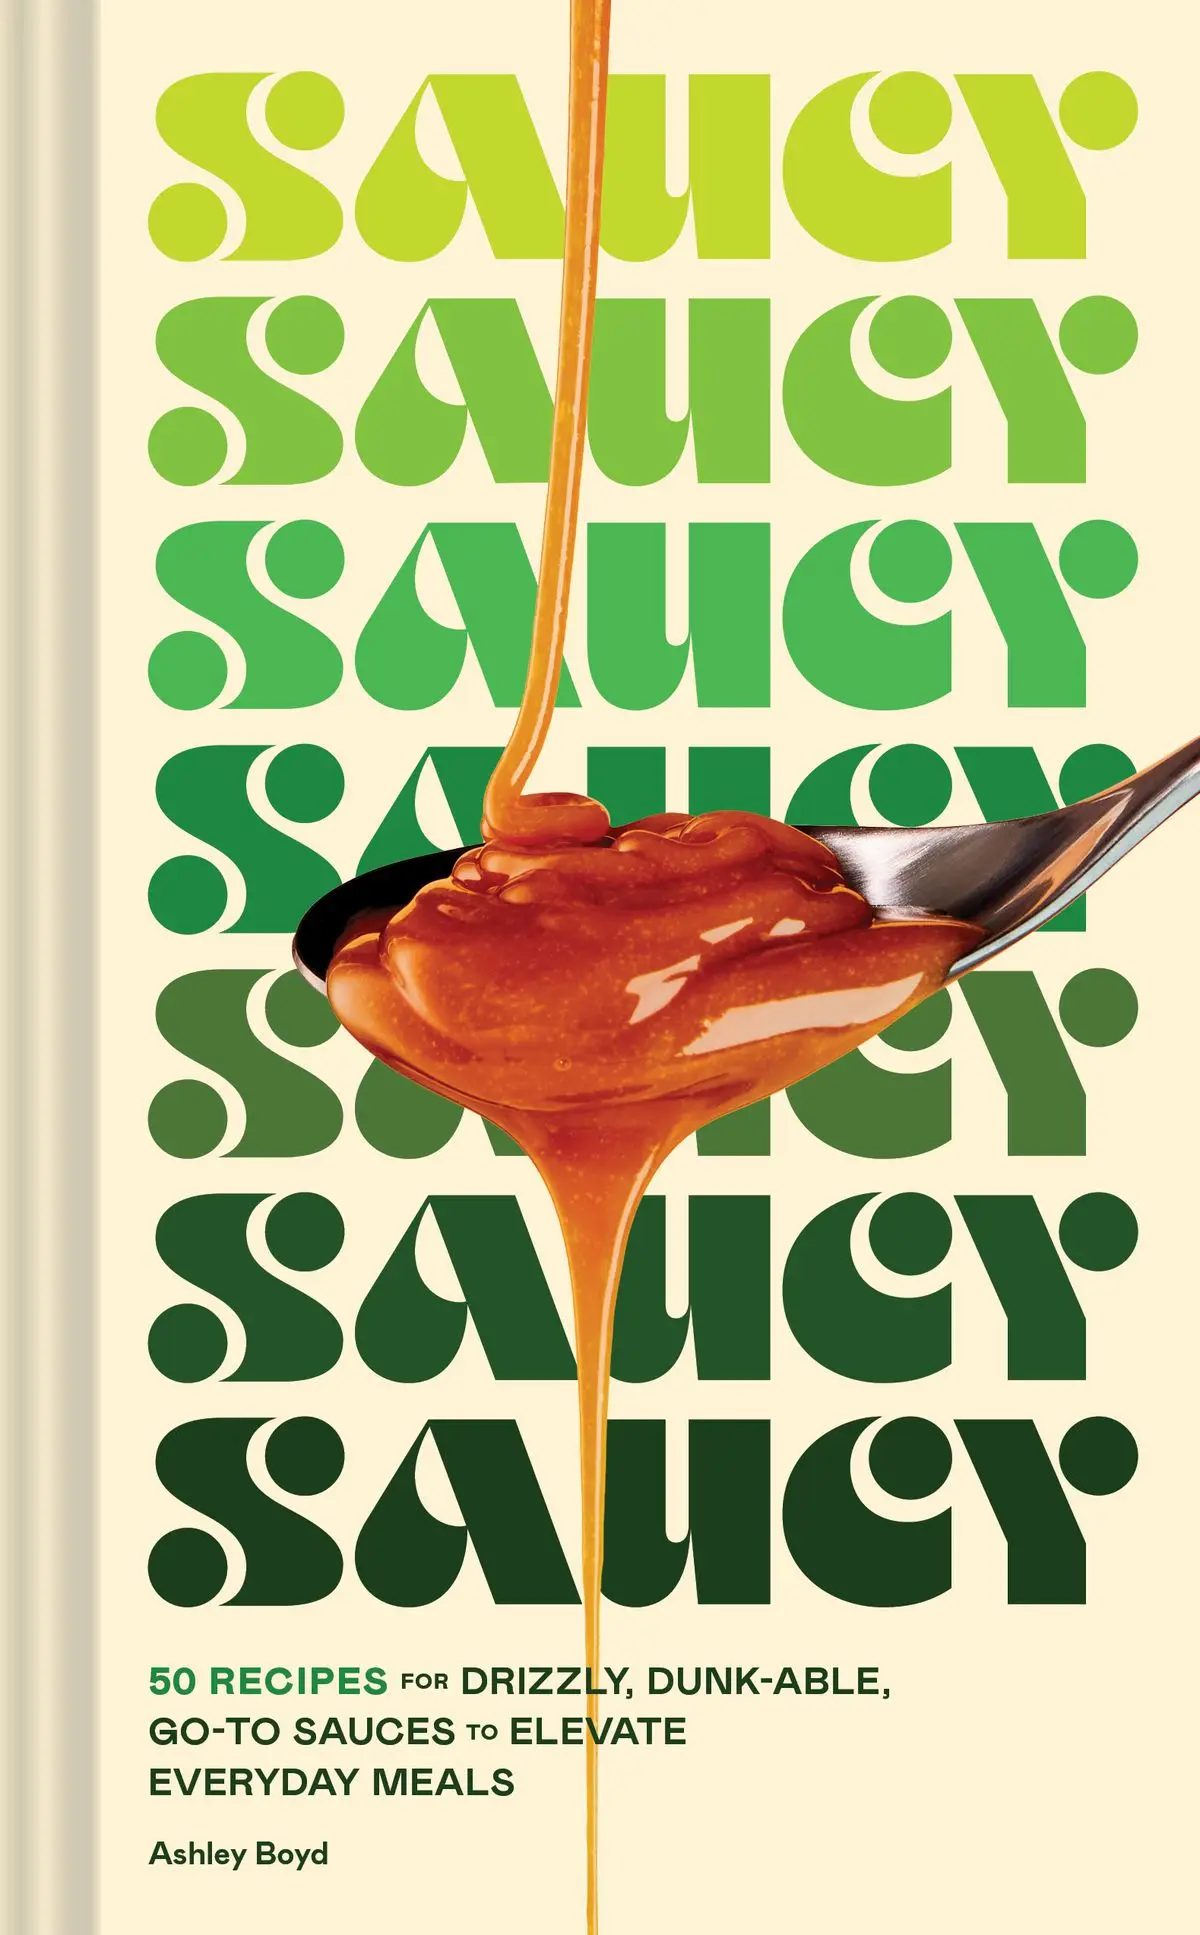 The cover of Saucy